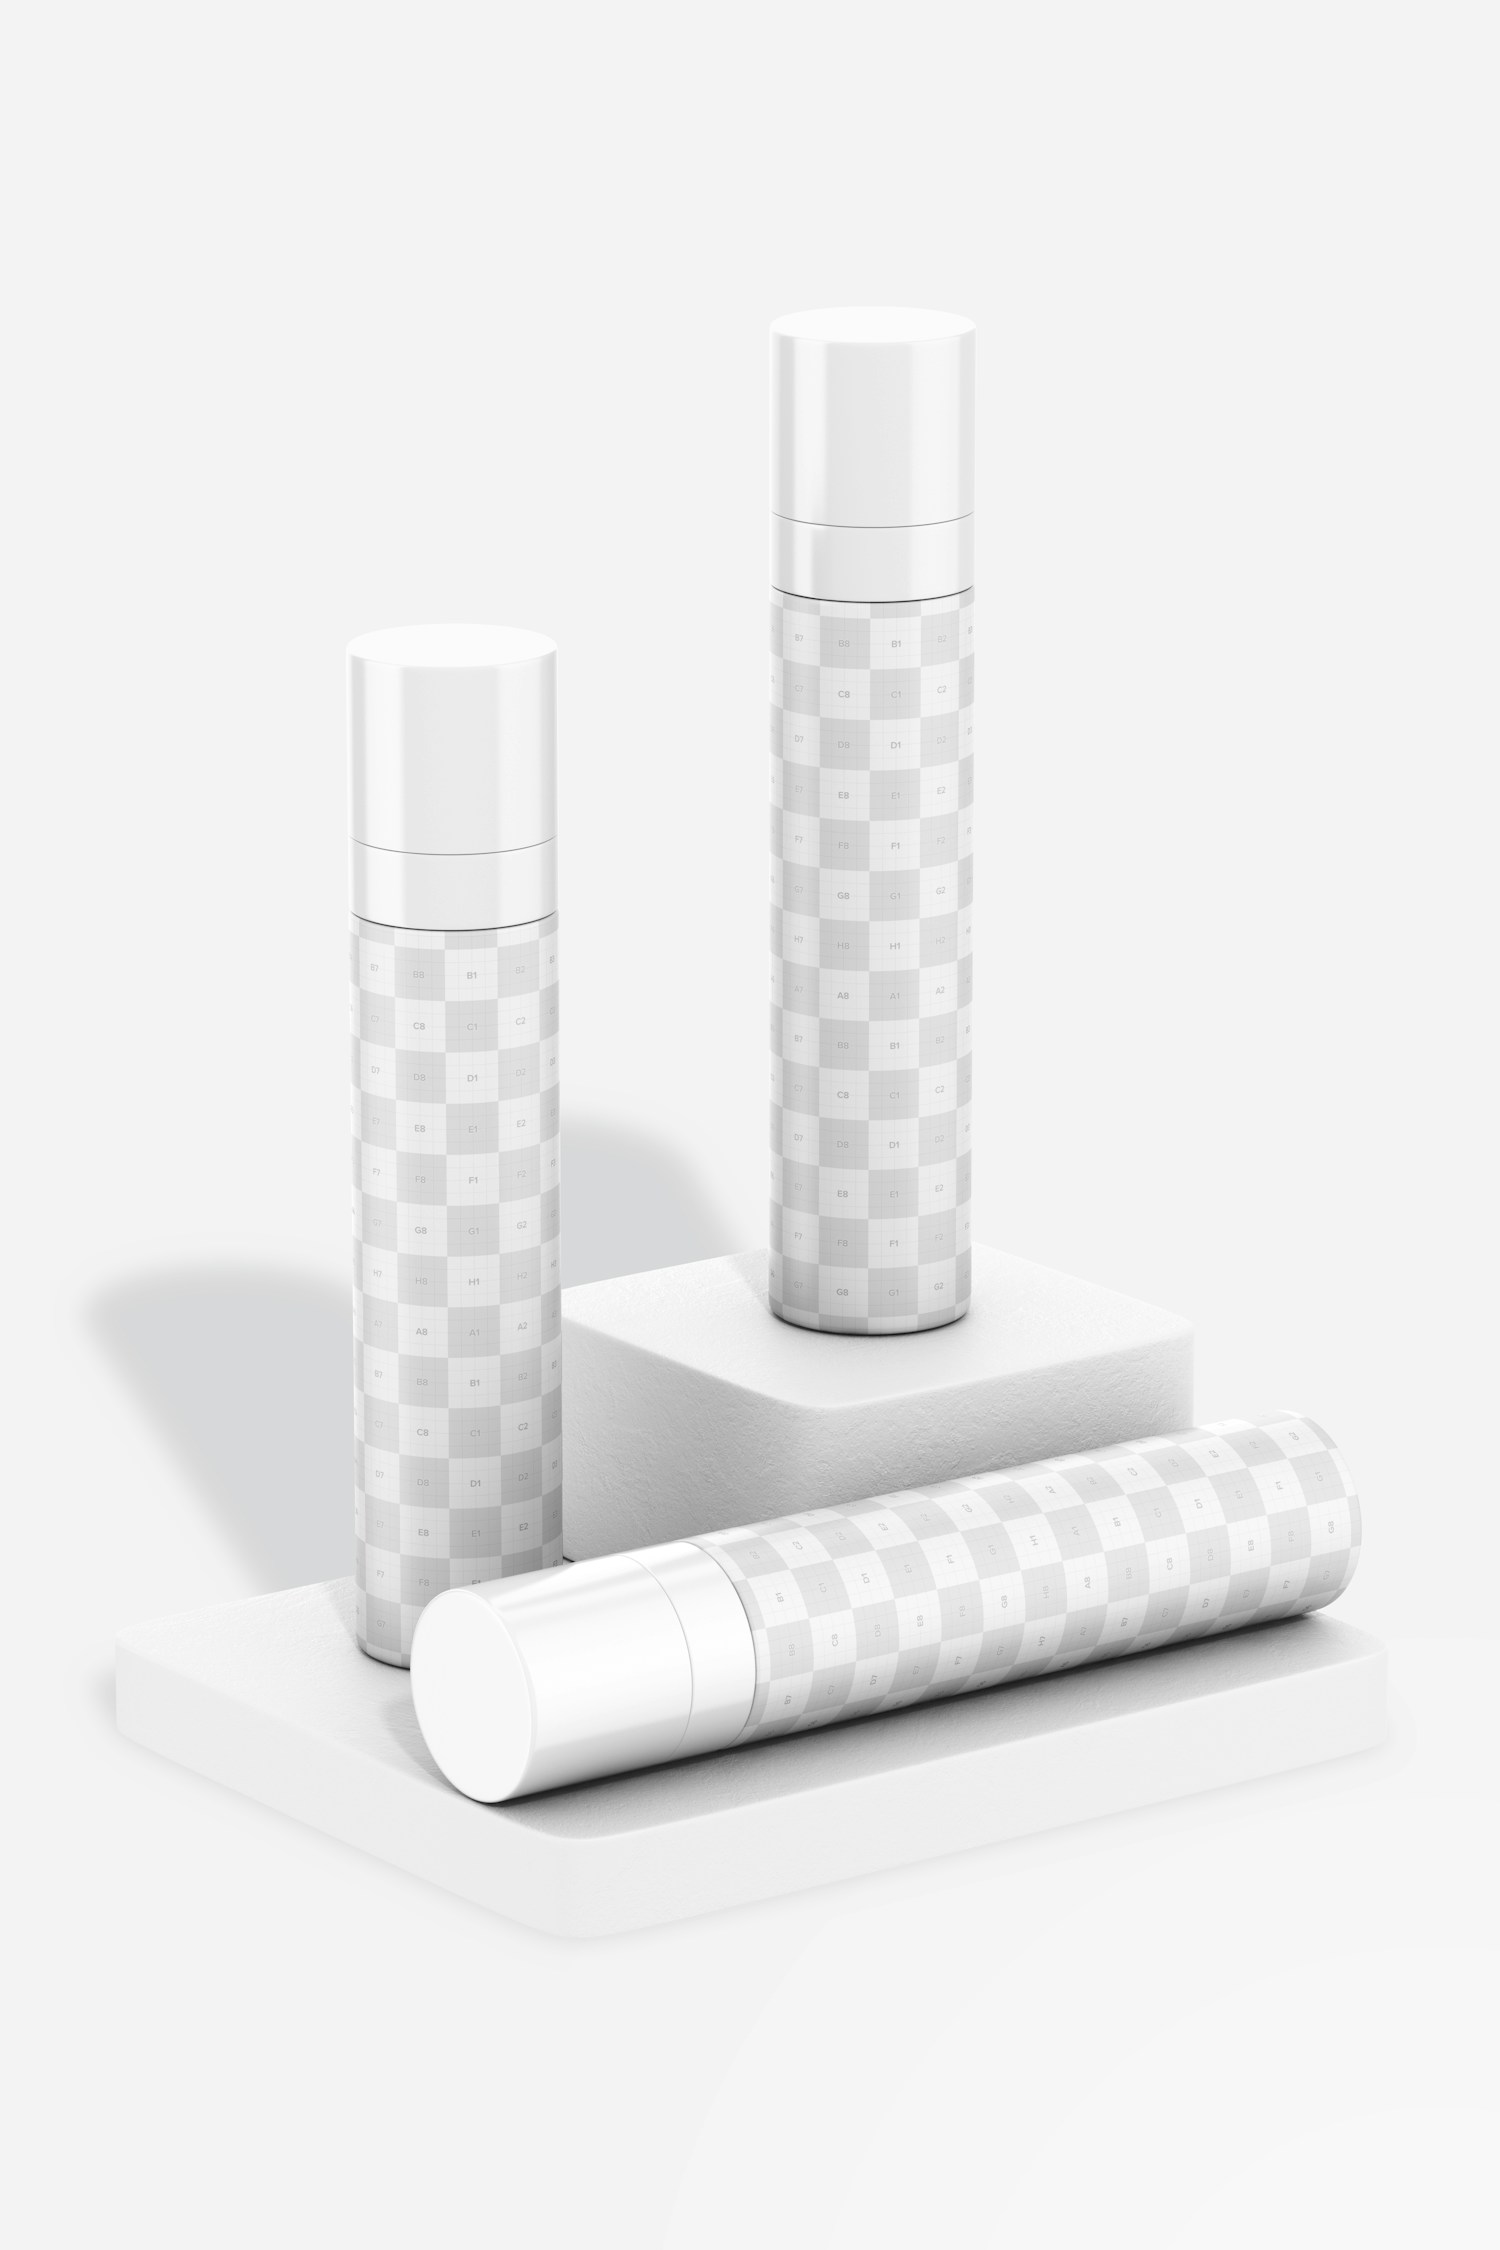 Facial Sunscreen Spray Bottles Mockup, Standing and Dropped